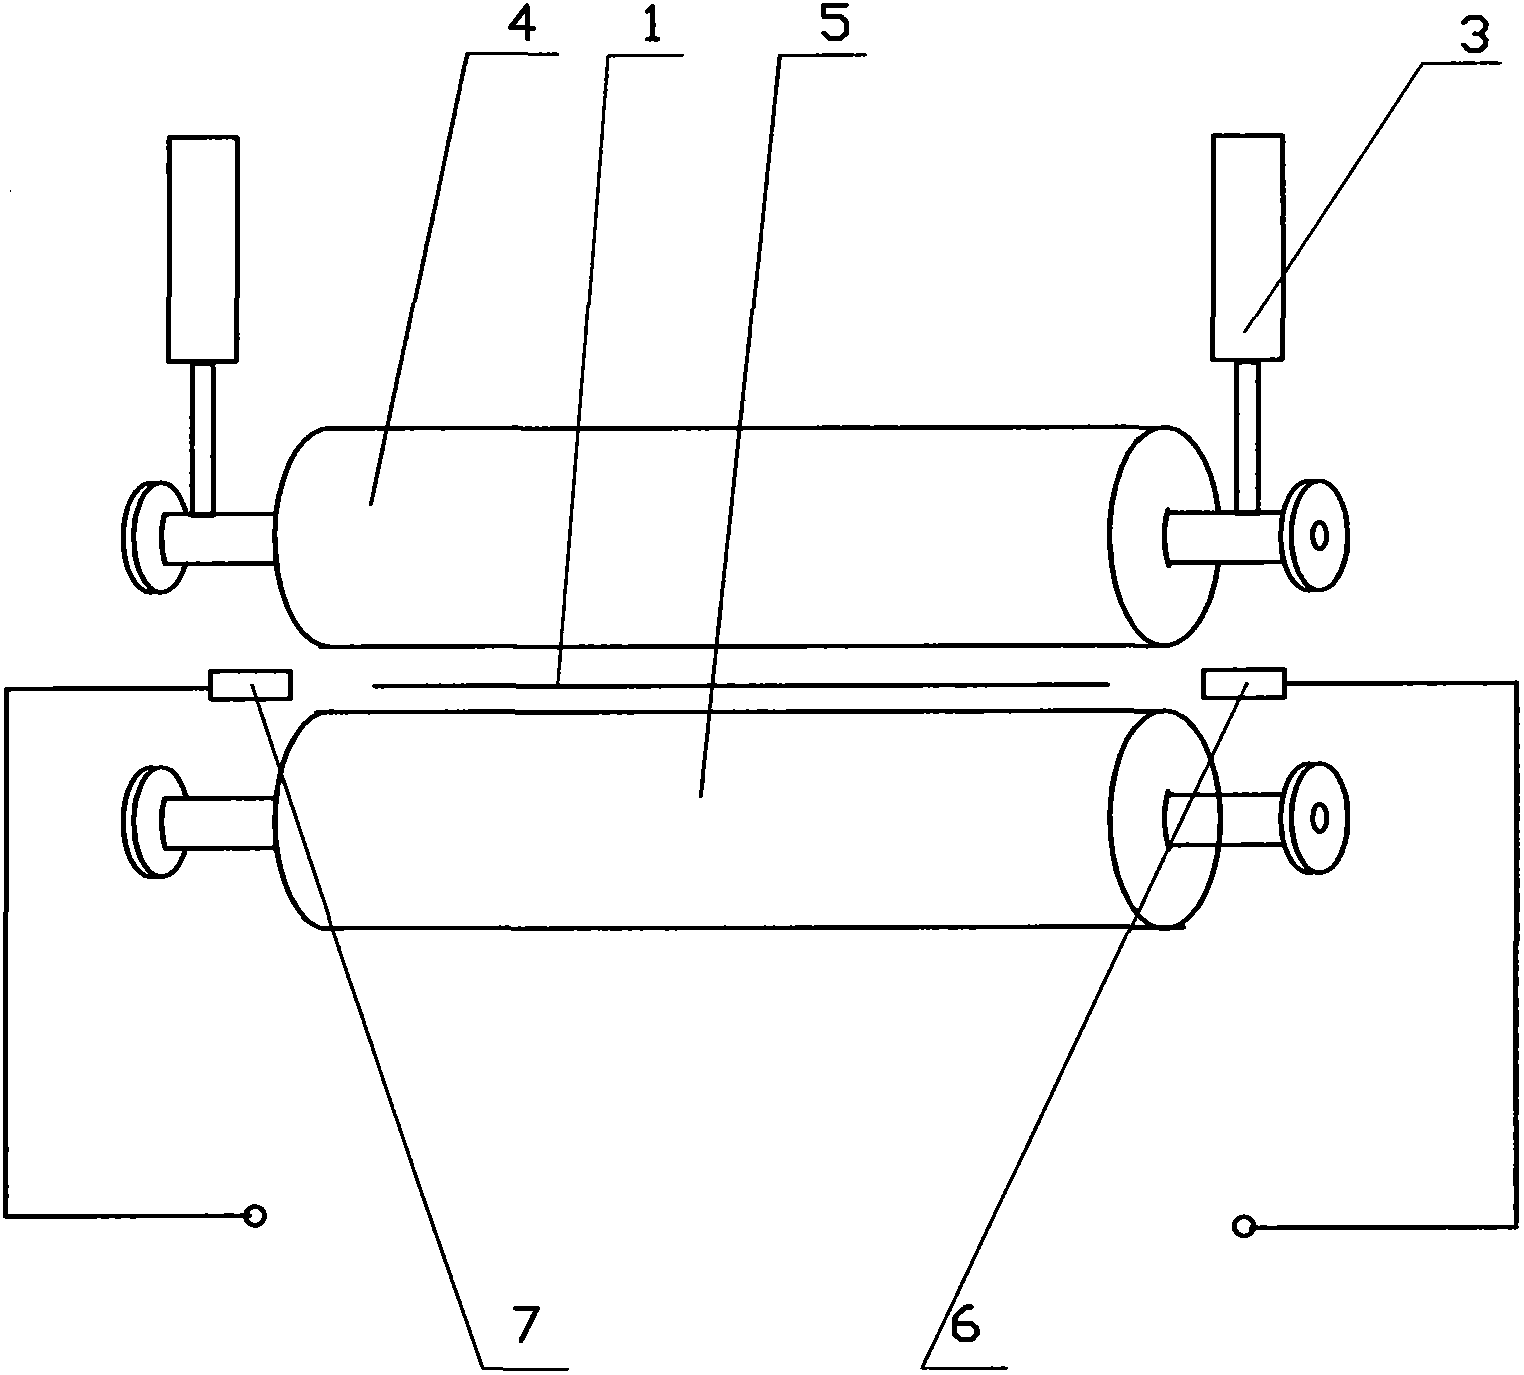 Compression roller safety control device